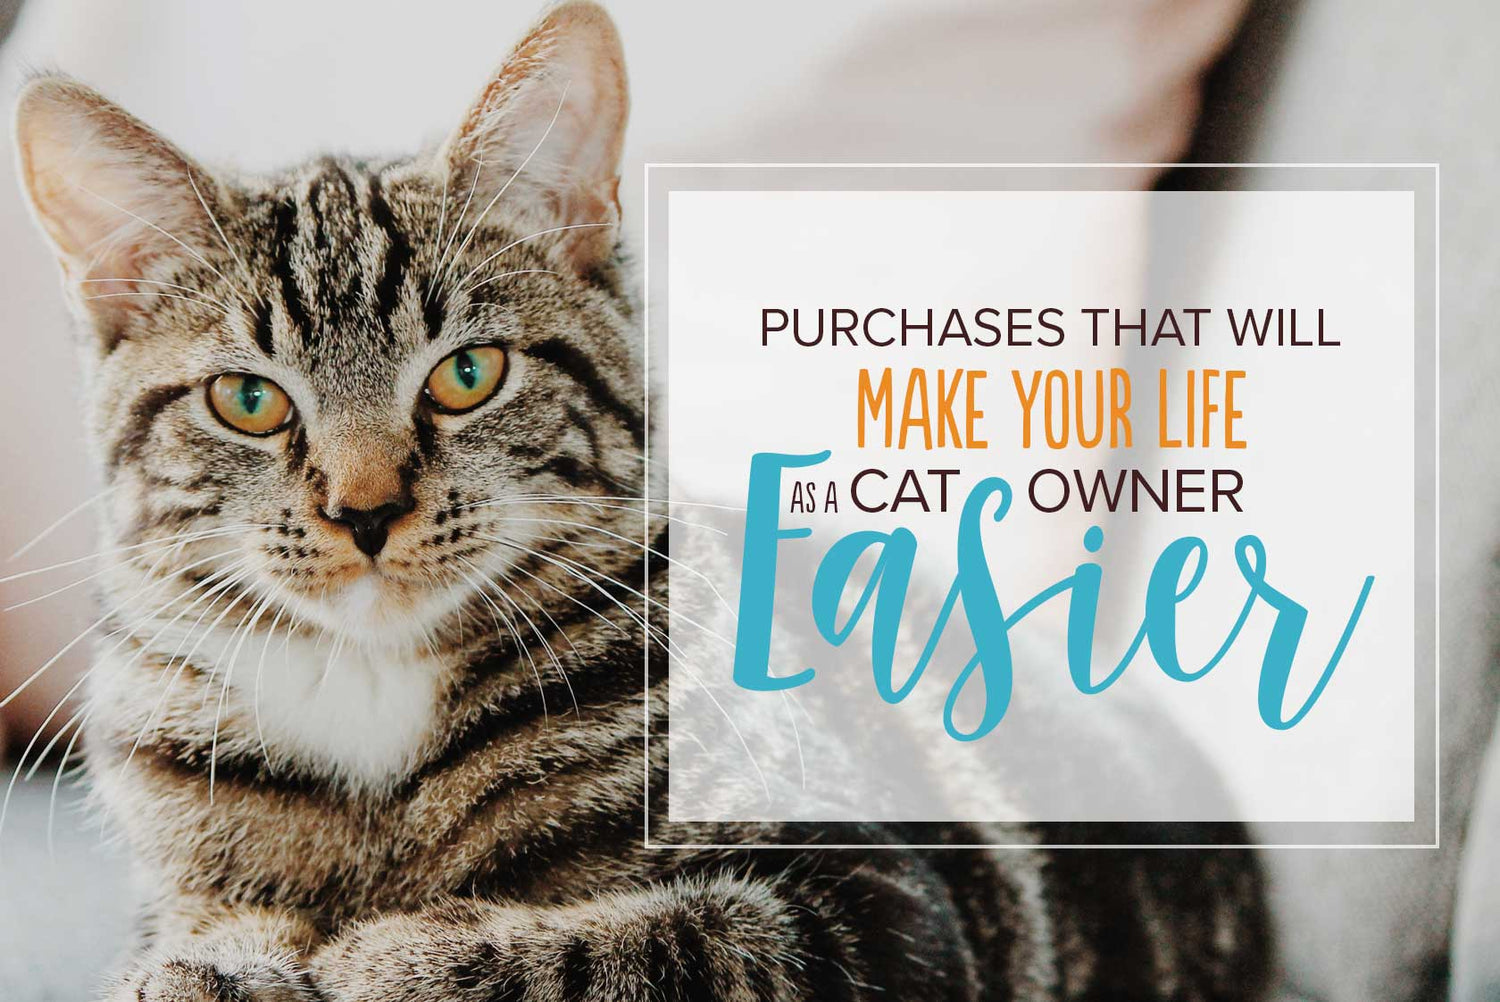 Oxyfresh - Cat owner purchases